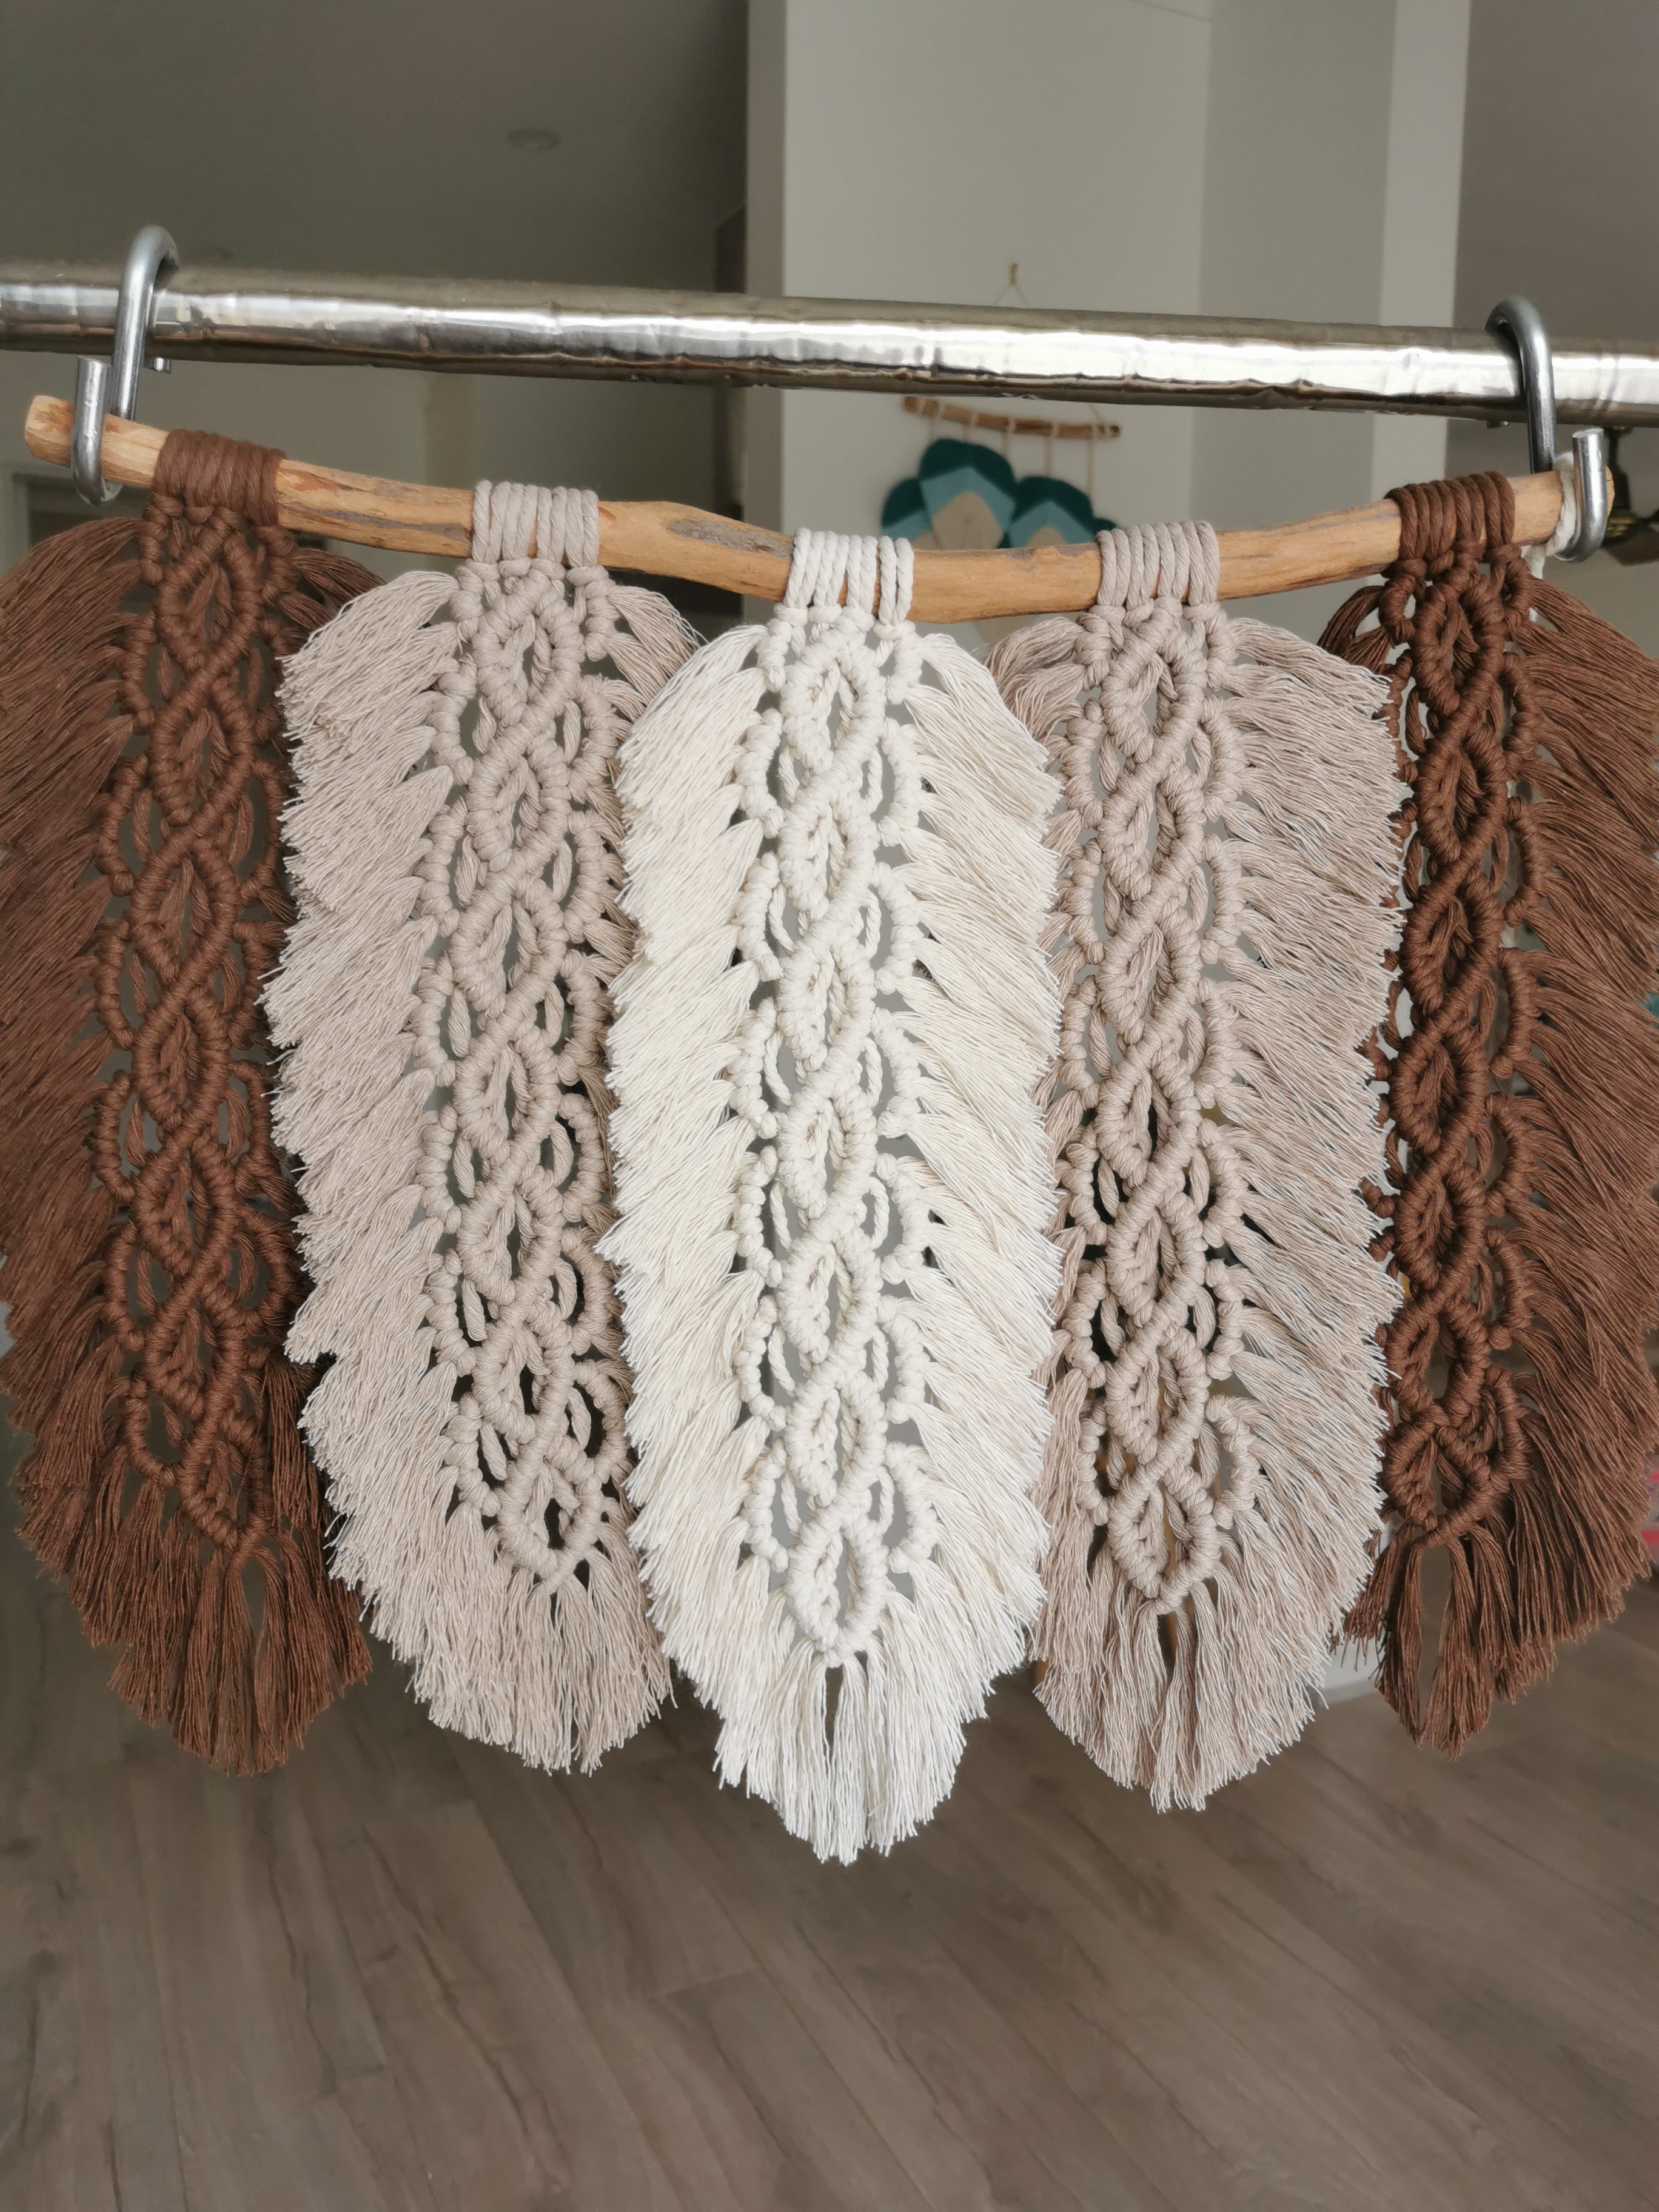 WOODS feathers wall hanging